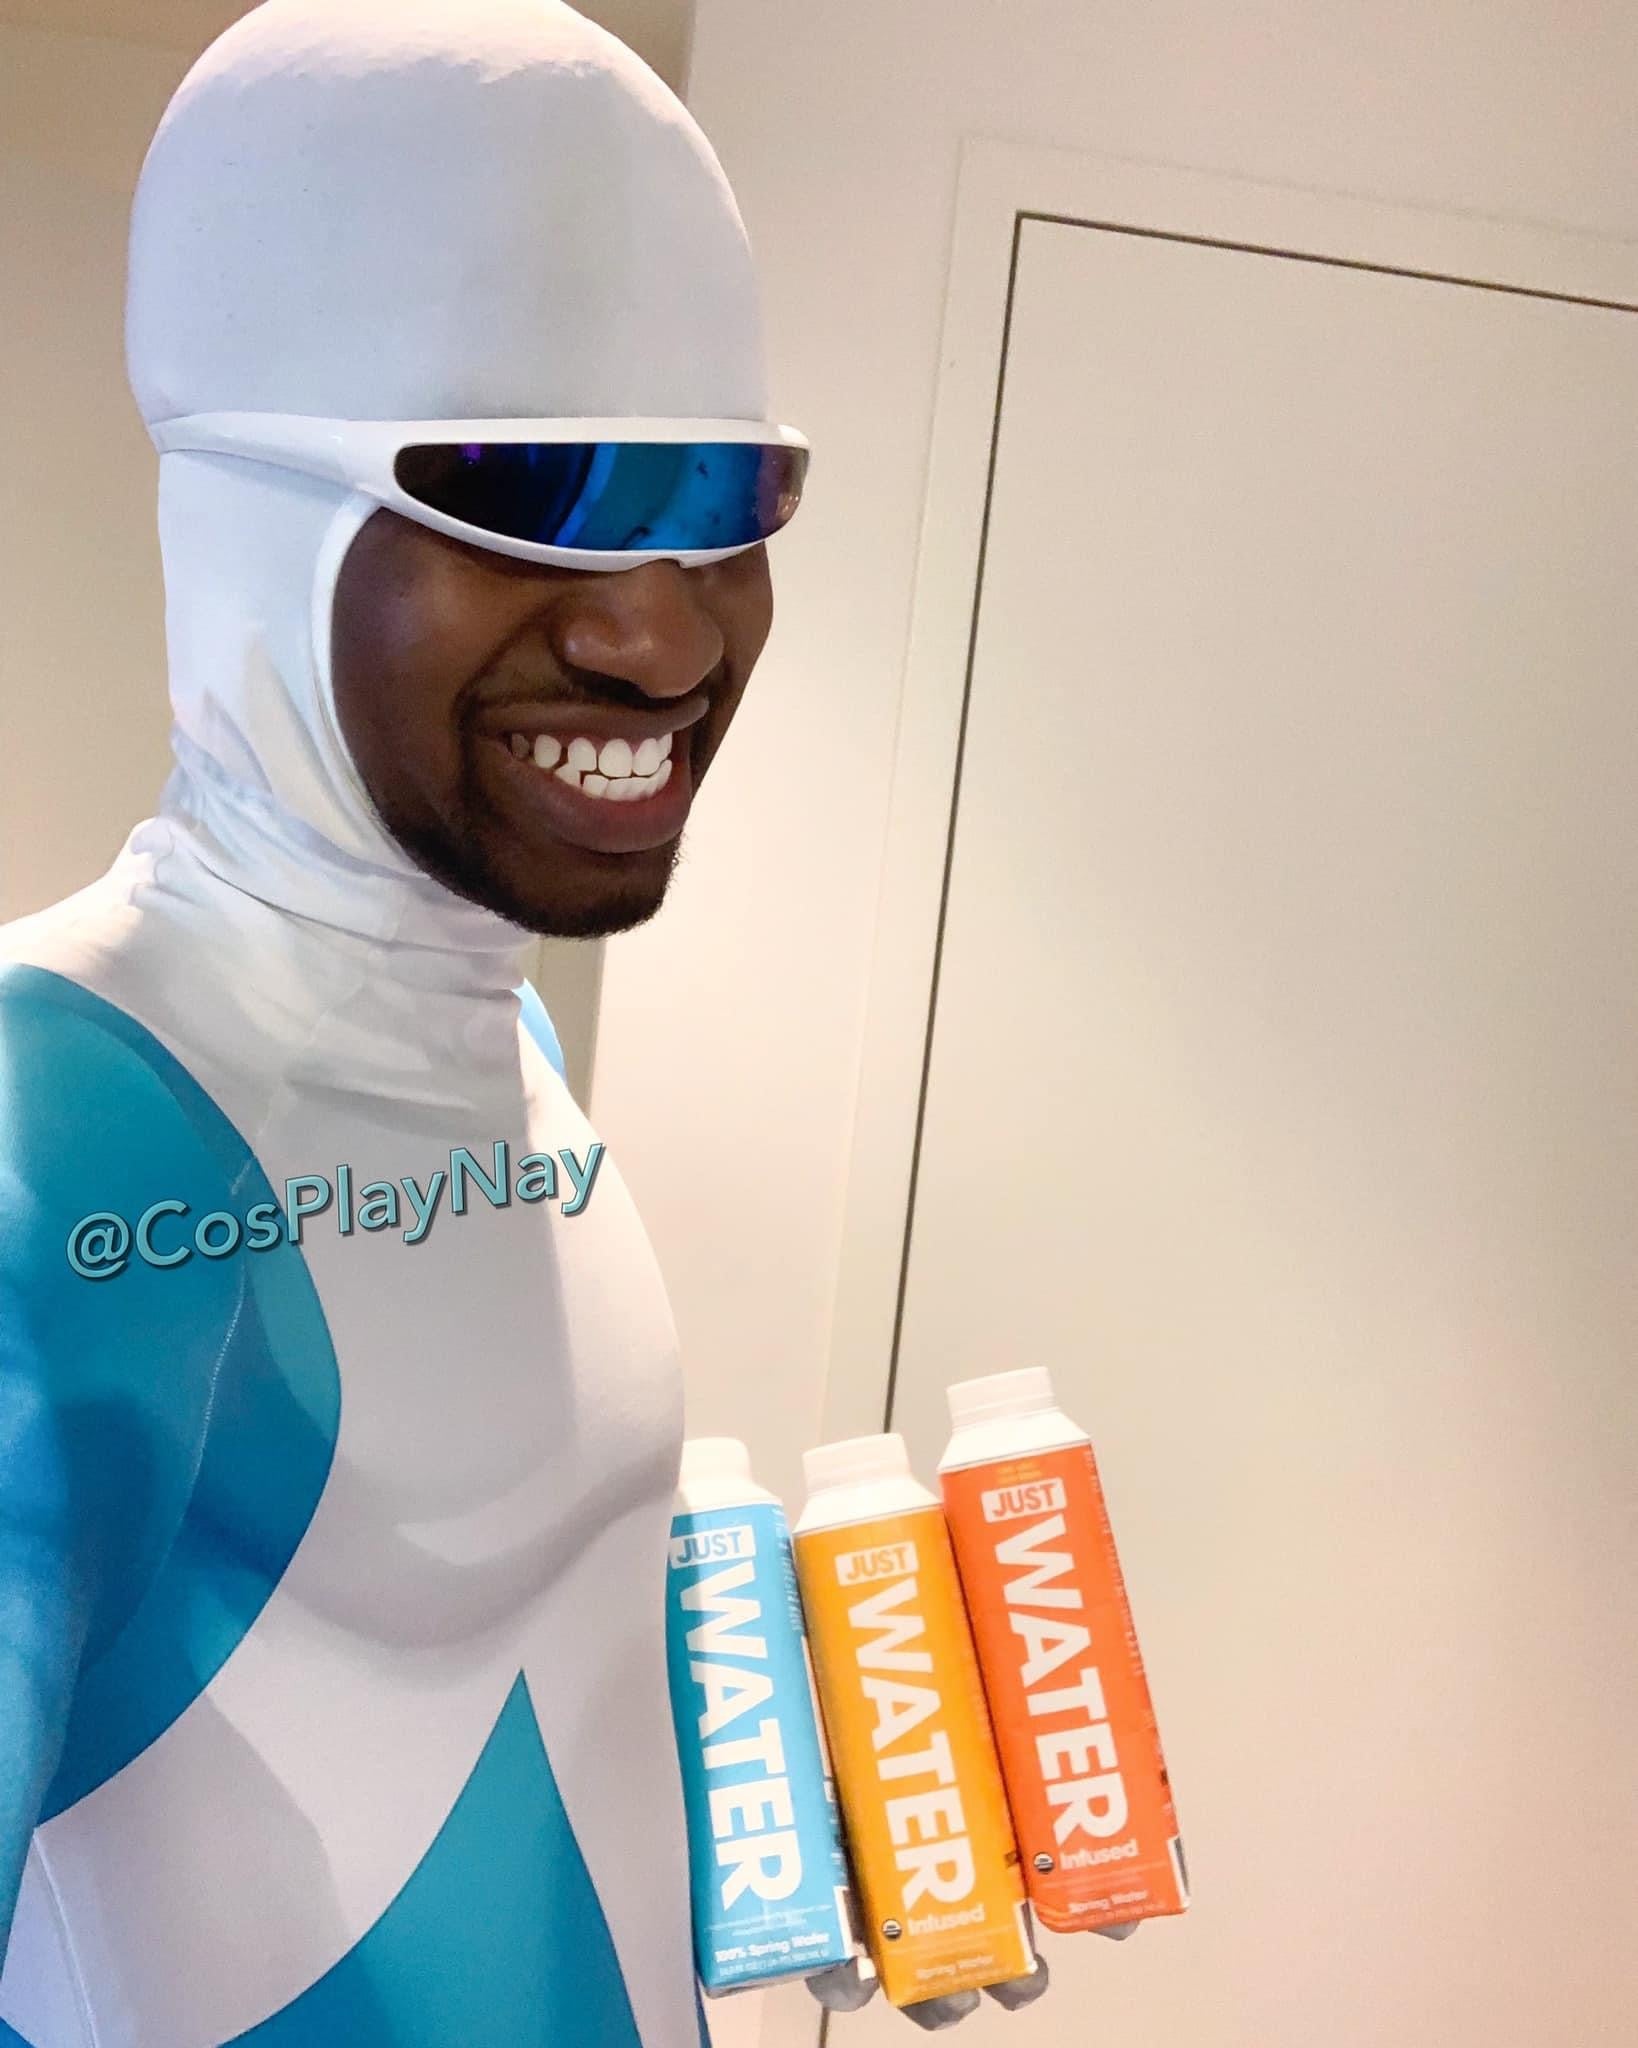 Frozone From The Incredibles Cosplay